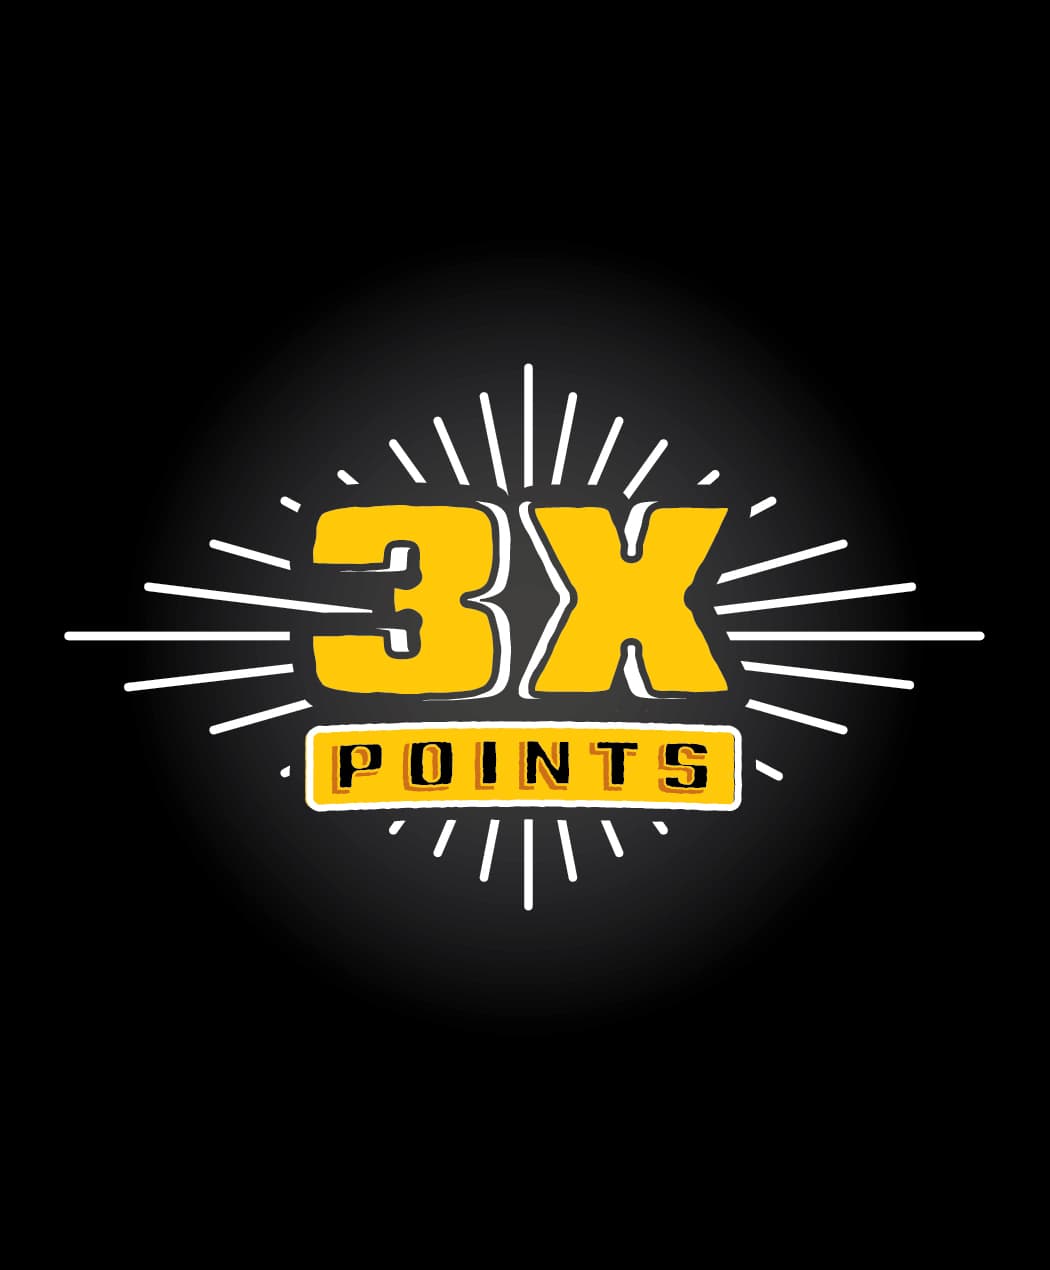 3x points promotion at YBR